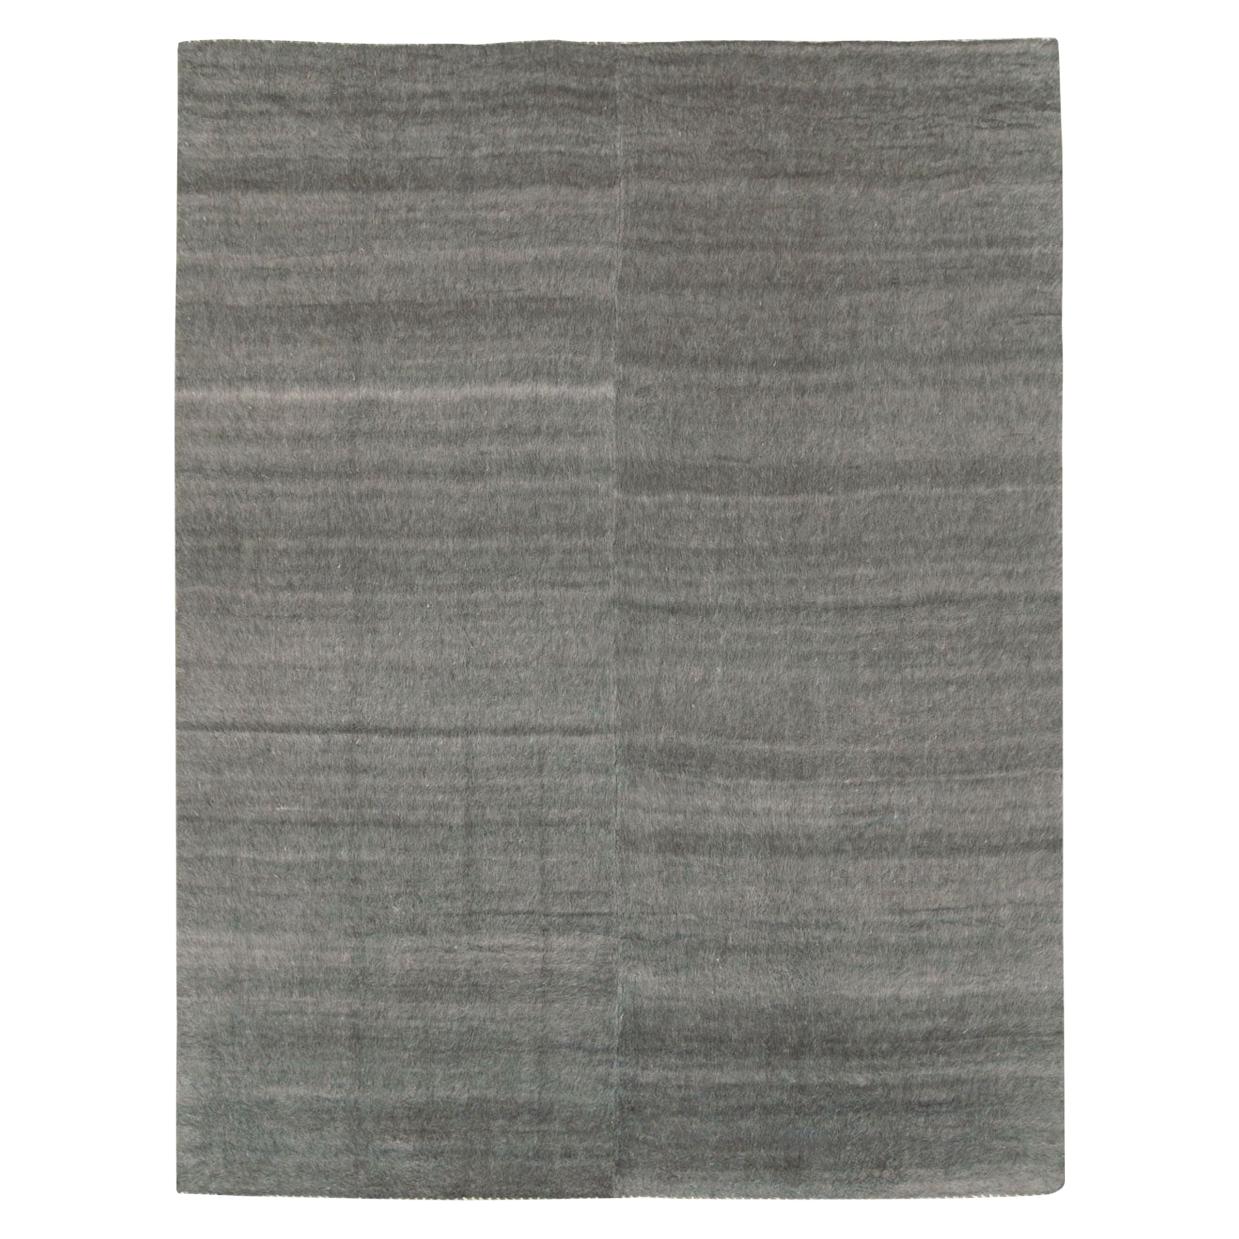 Contemporary Turkish Room Size Carpet in a Grey Minimalist Design For Sale